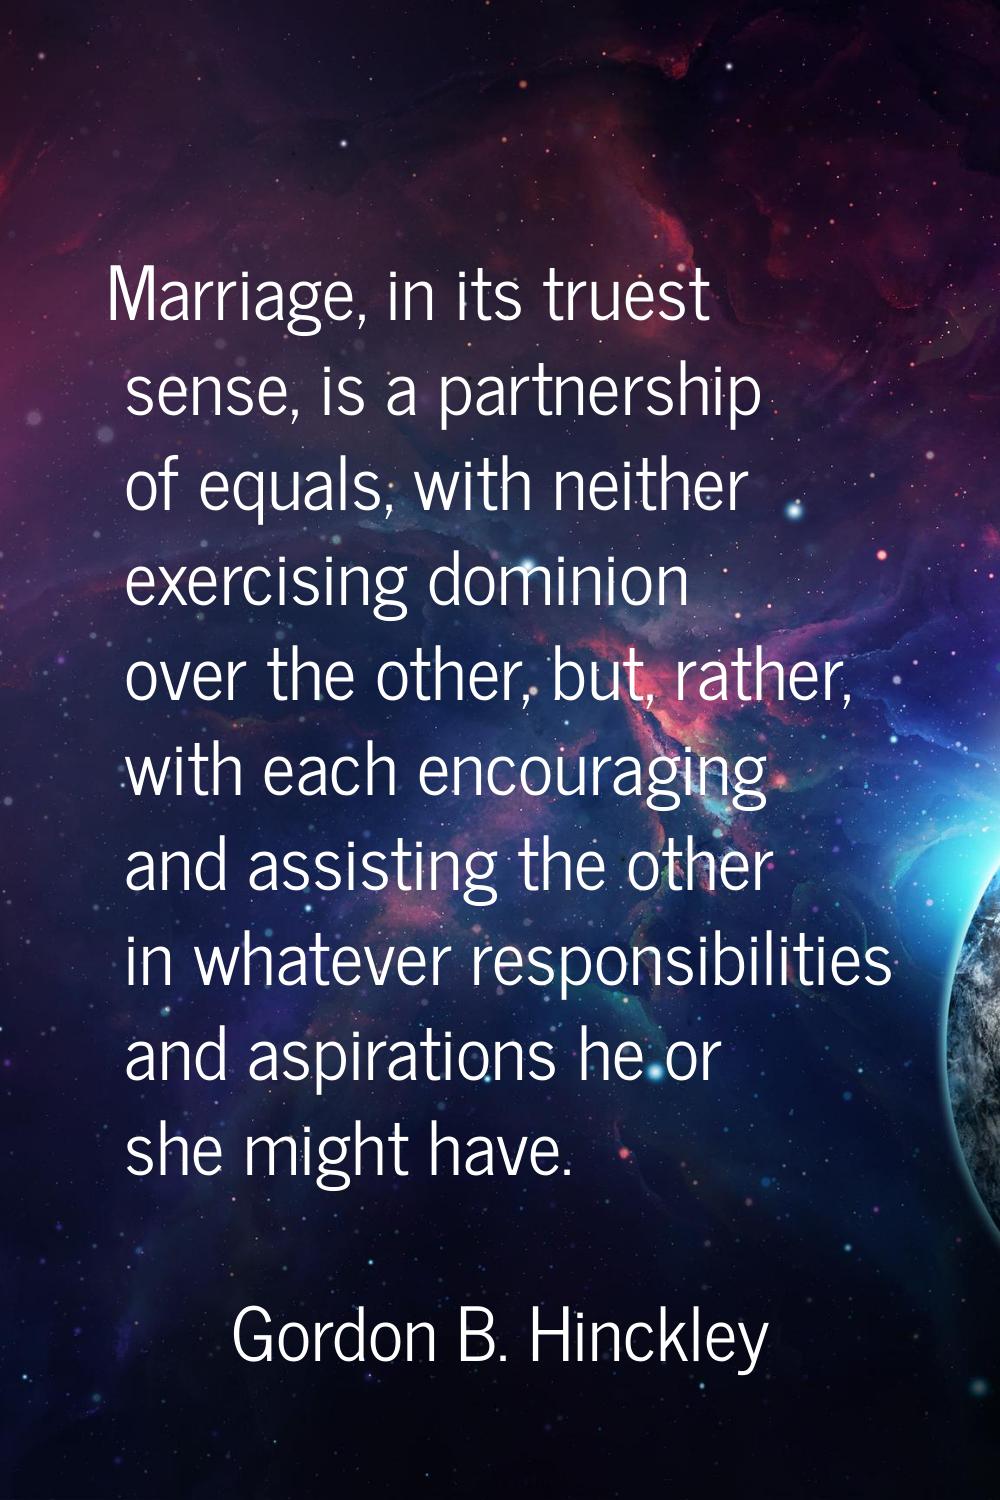 Marriage, in its truest sense, is a partnership of equals, with neither exercising dominion over th